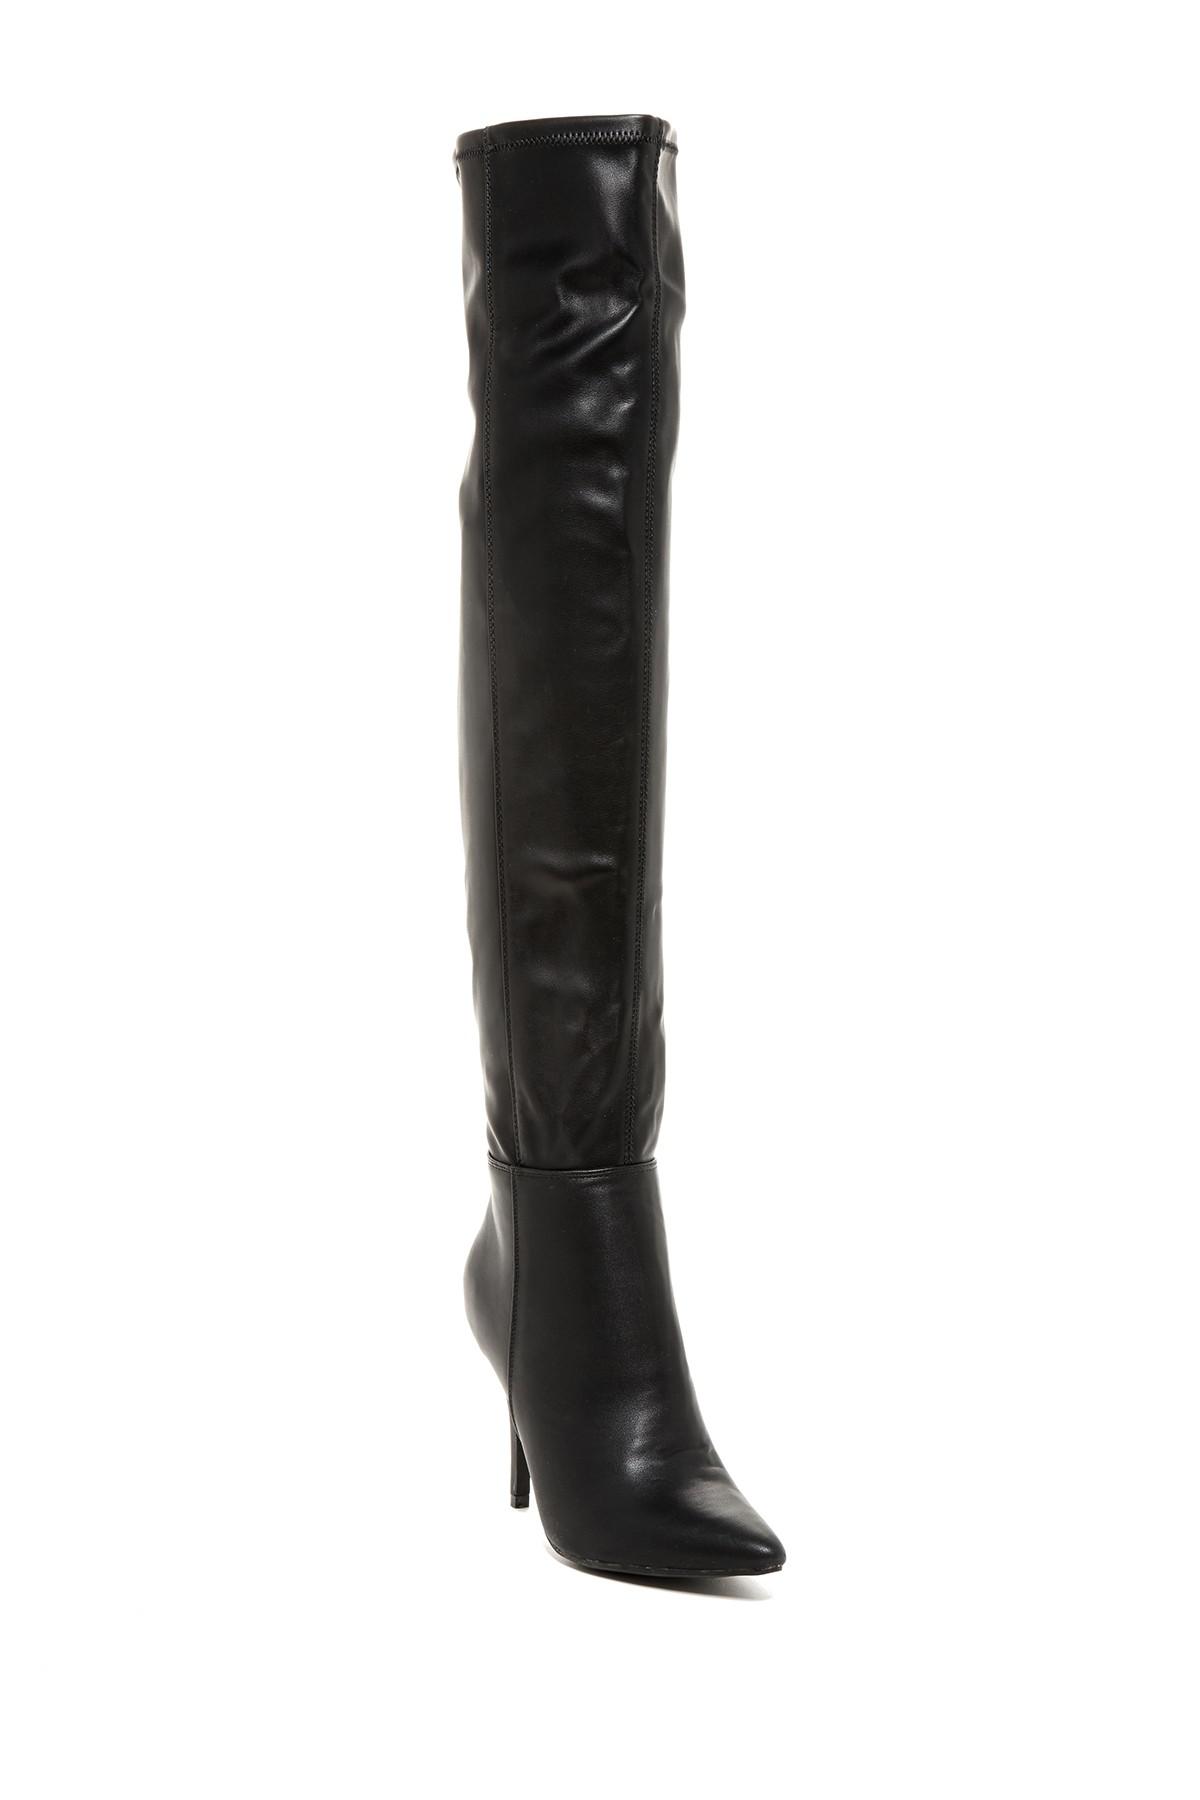 Chinese Laundry Sacred Over-the-knee Boot in Black - Lyst